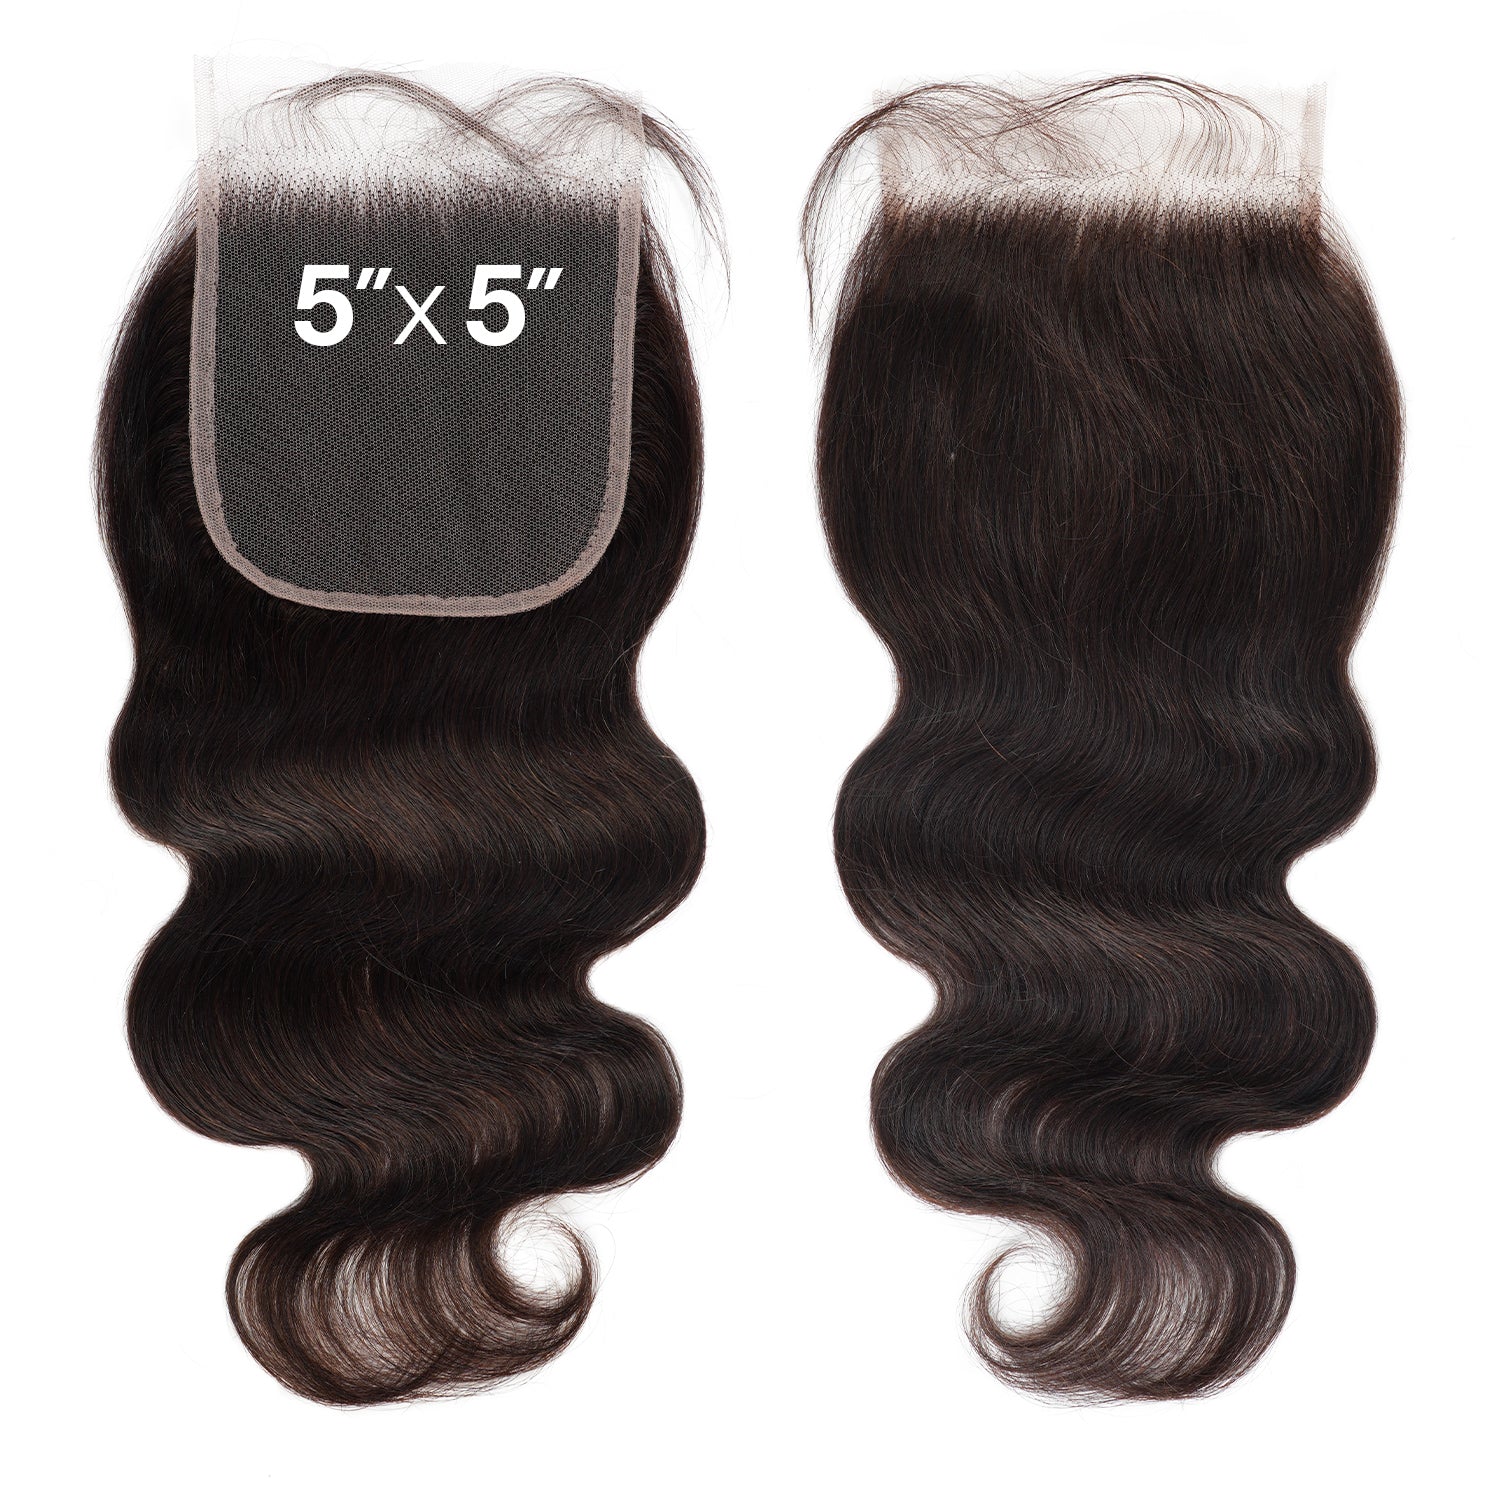 Unprocessed Virgin Human Hair Weave 5x5 Bleached Knot Lace Closure Body Wave